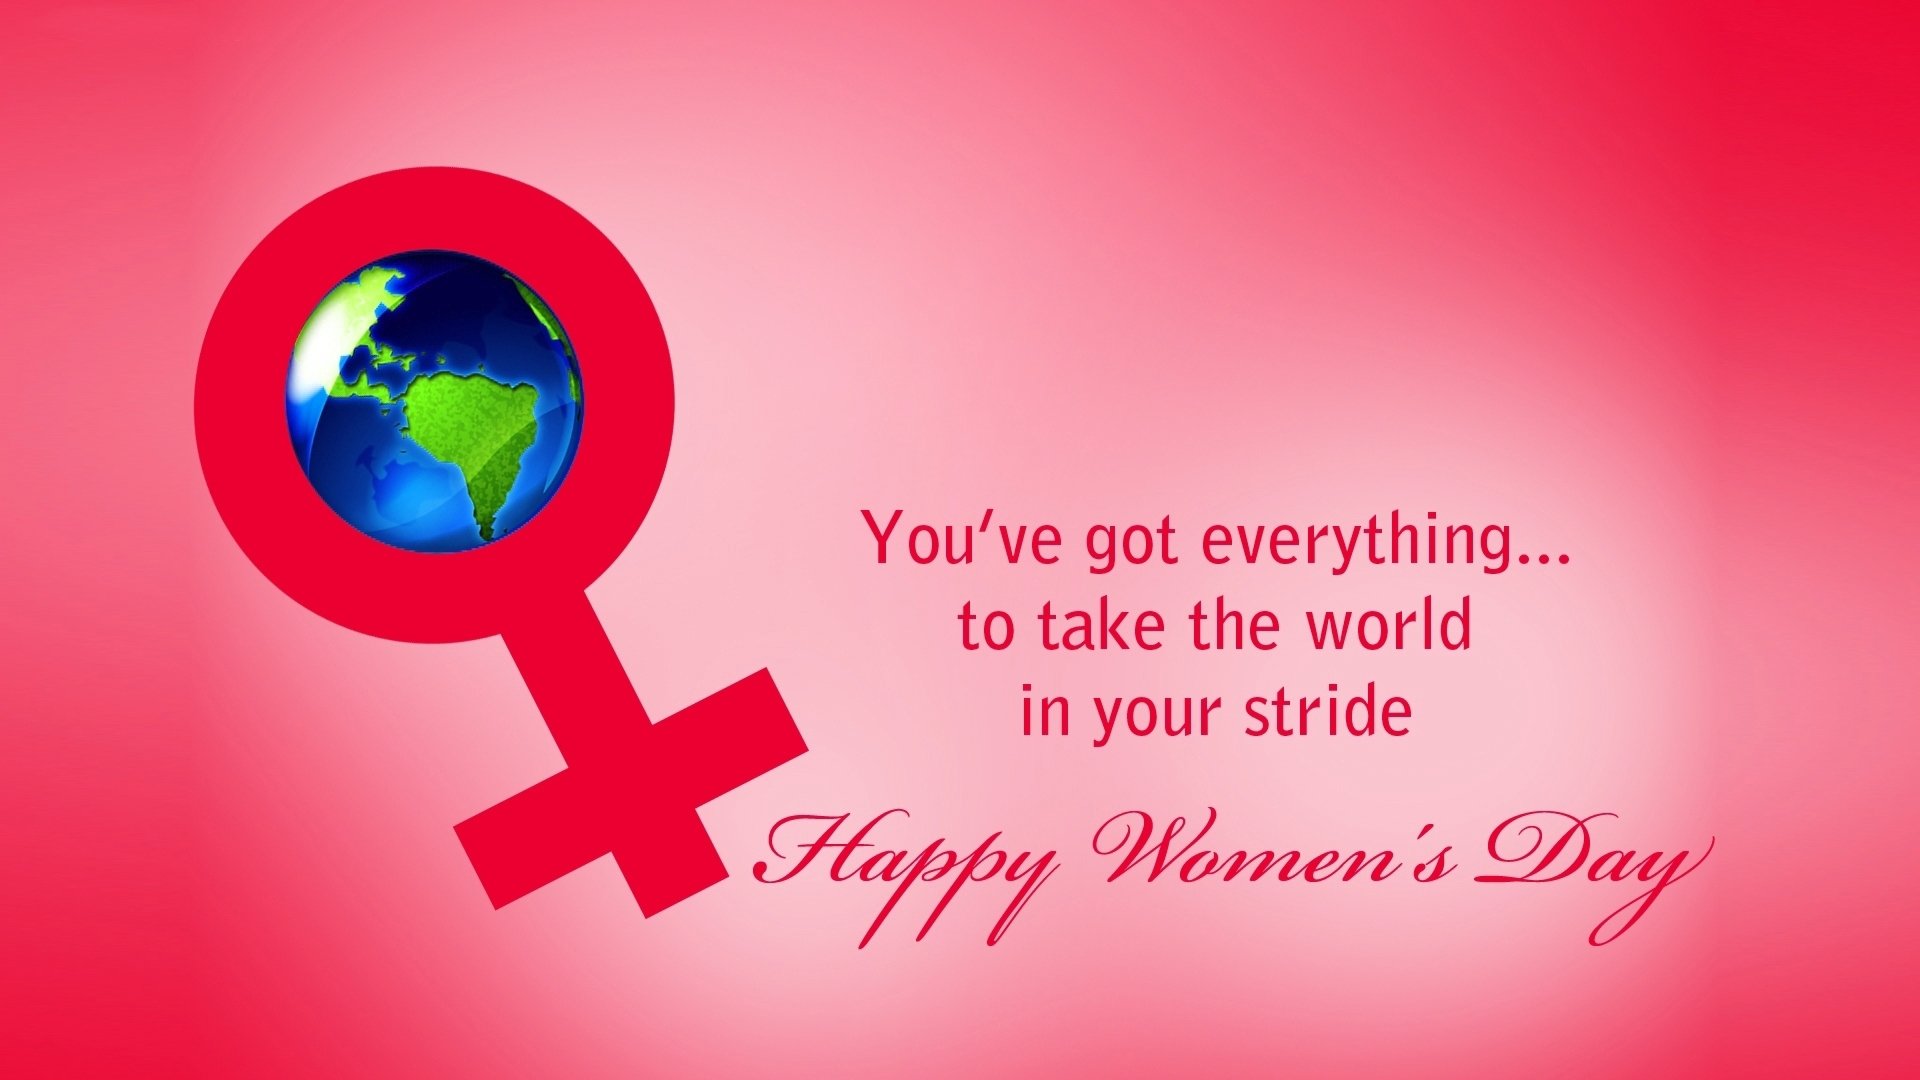 Wallpapers Id - - Cute Women's Day Wishes , HD Wallpaper & Backgrounds